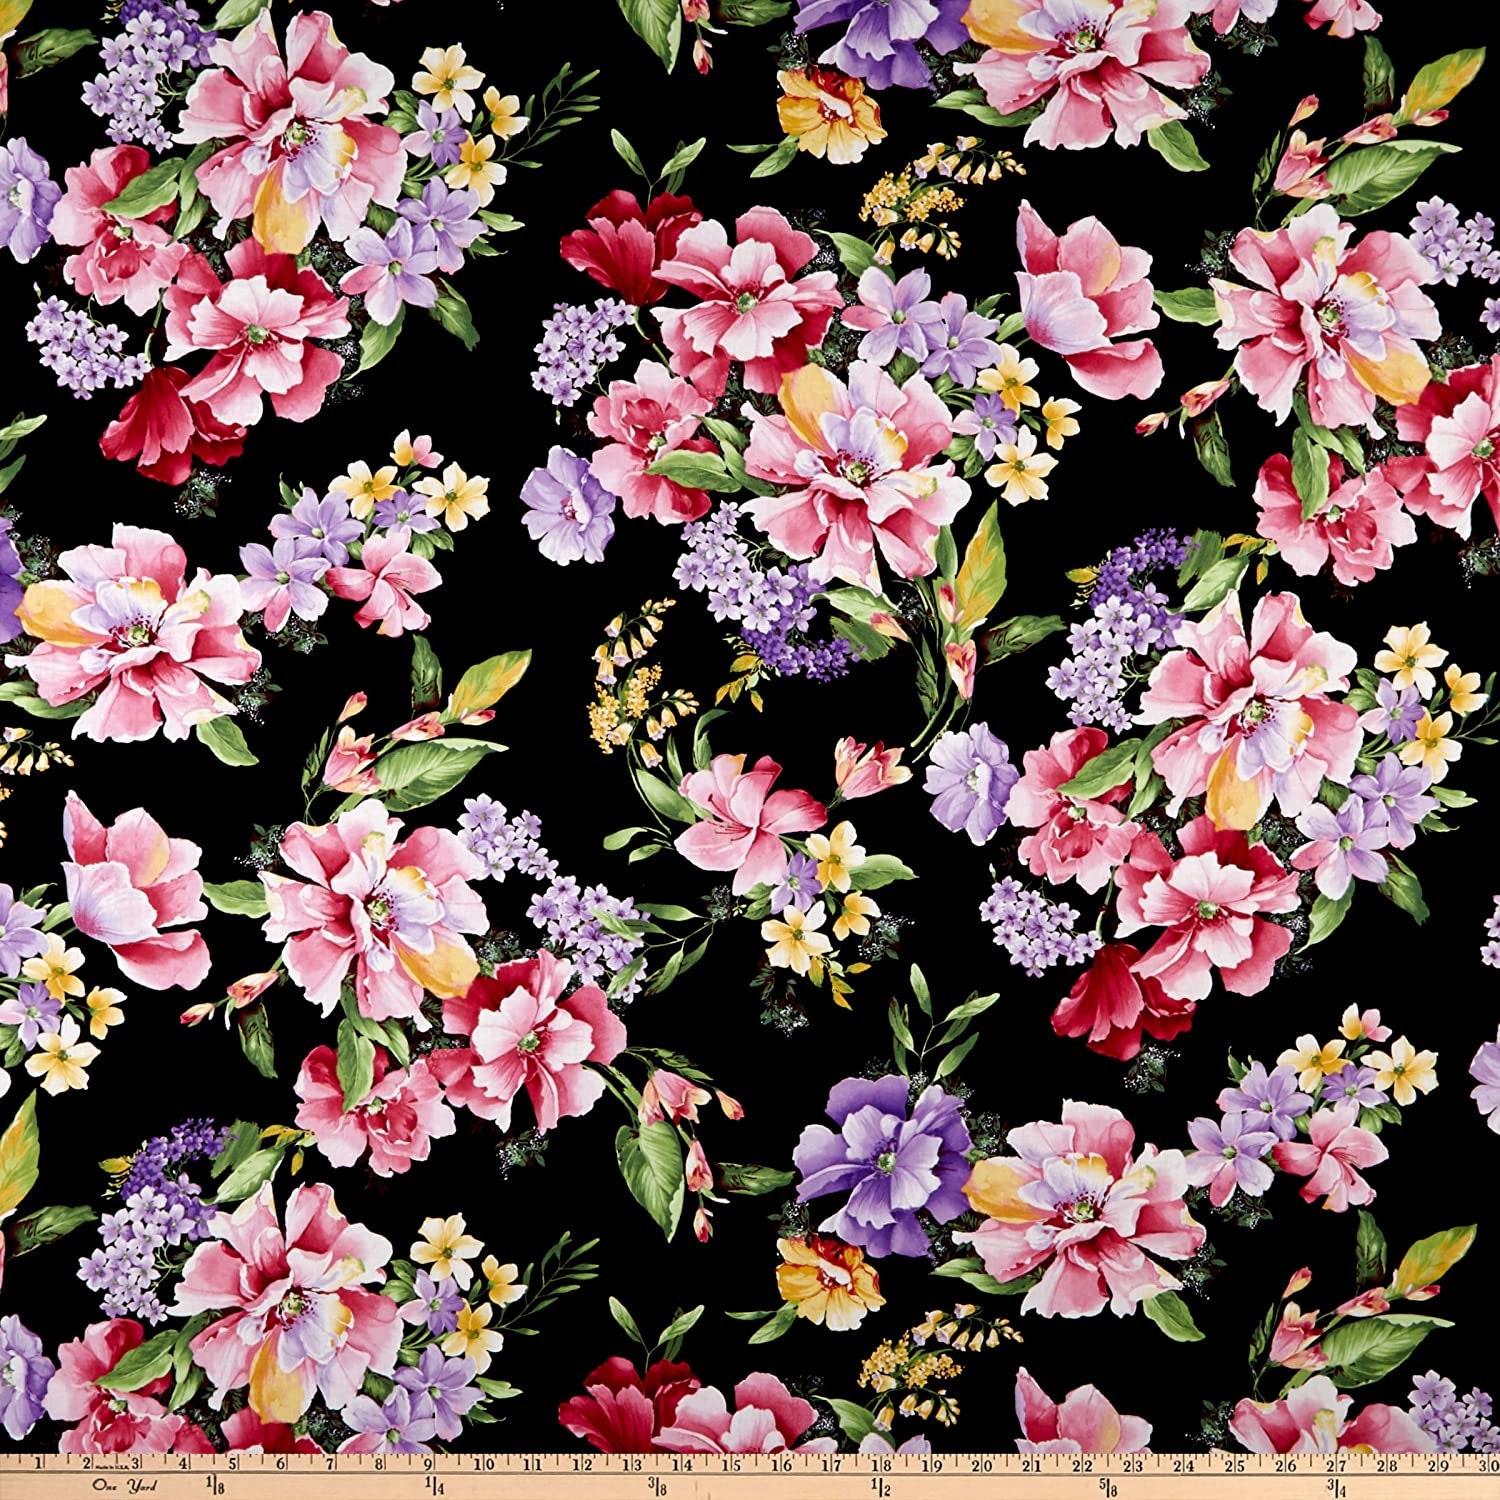 Floral Fabric, Rose Fabric: Timeless Treasures Isabelle Wild Rose rose ...